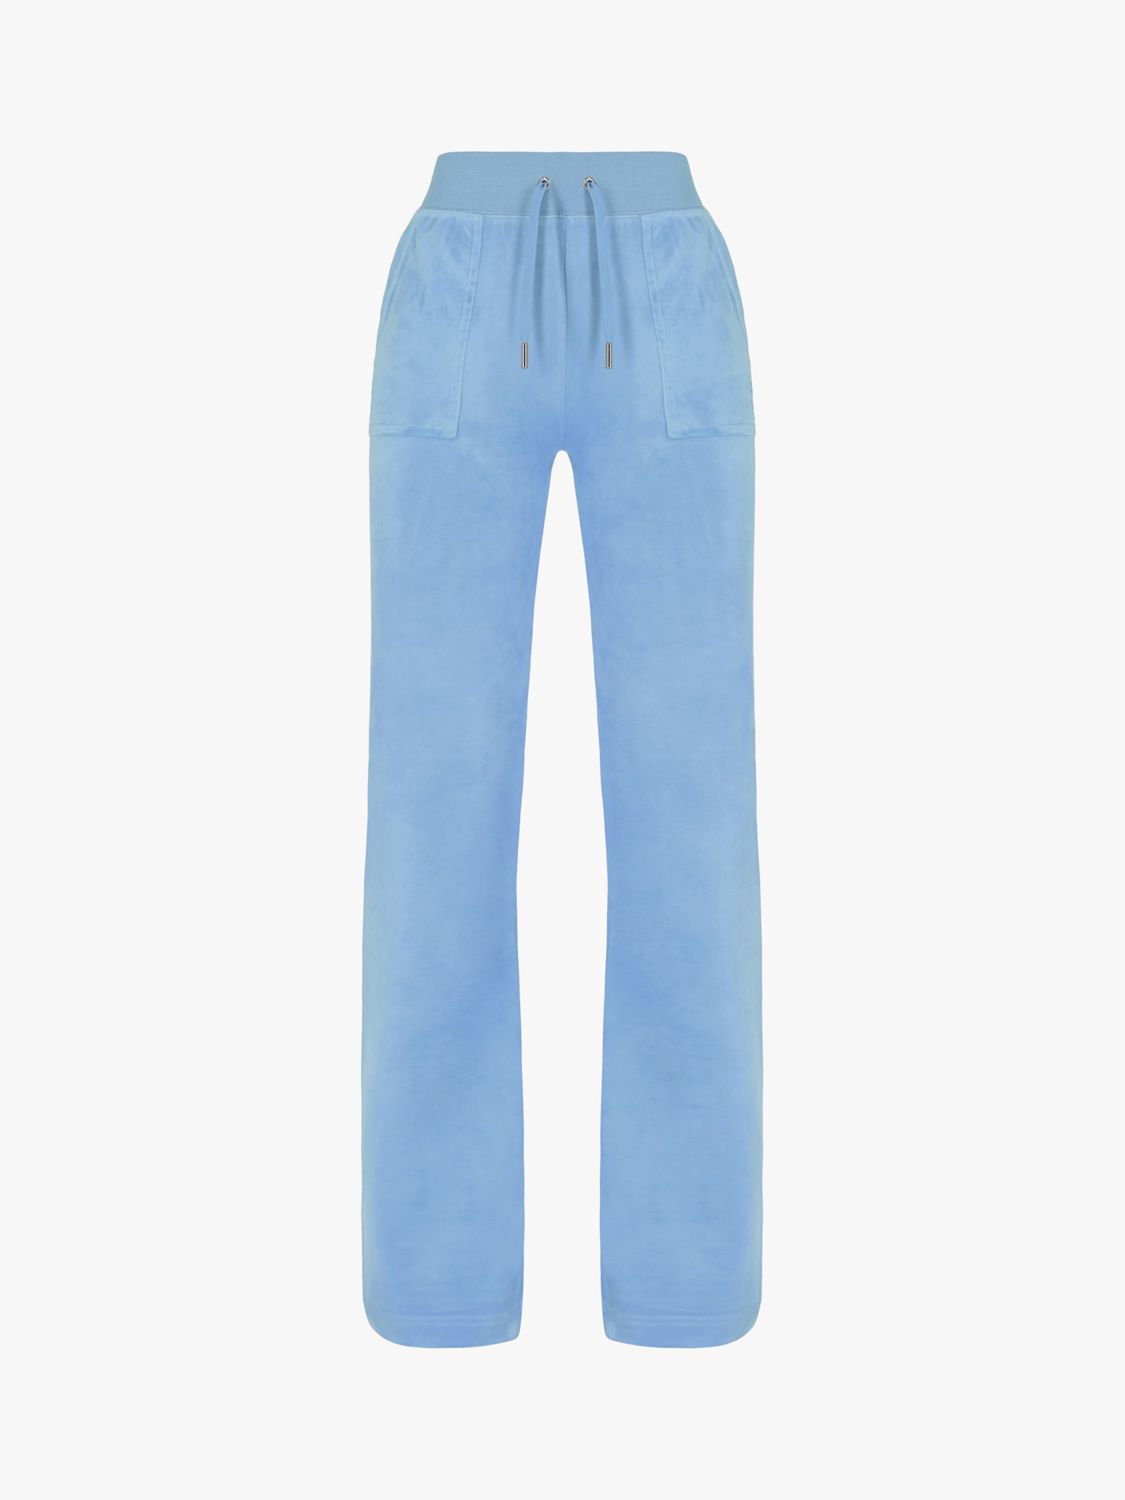 Juicy Couture Del Ray Tracksuit Bottoms, Powder Blue, S